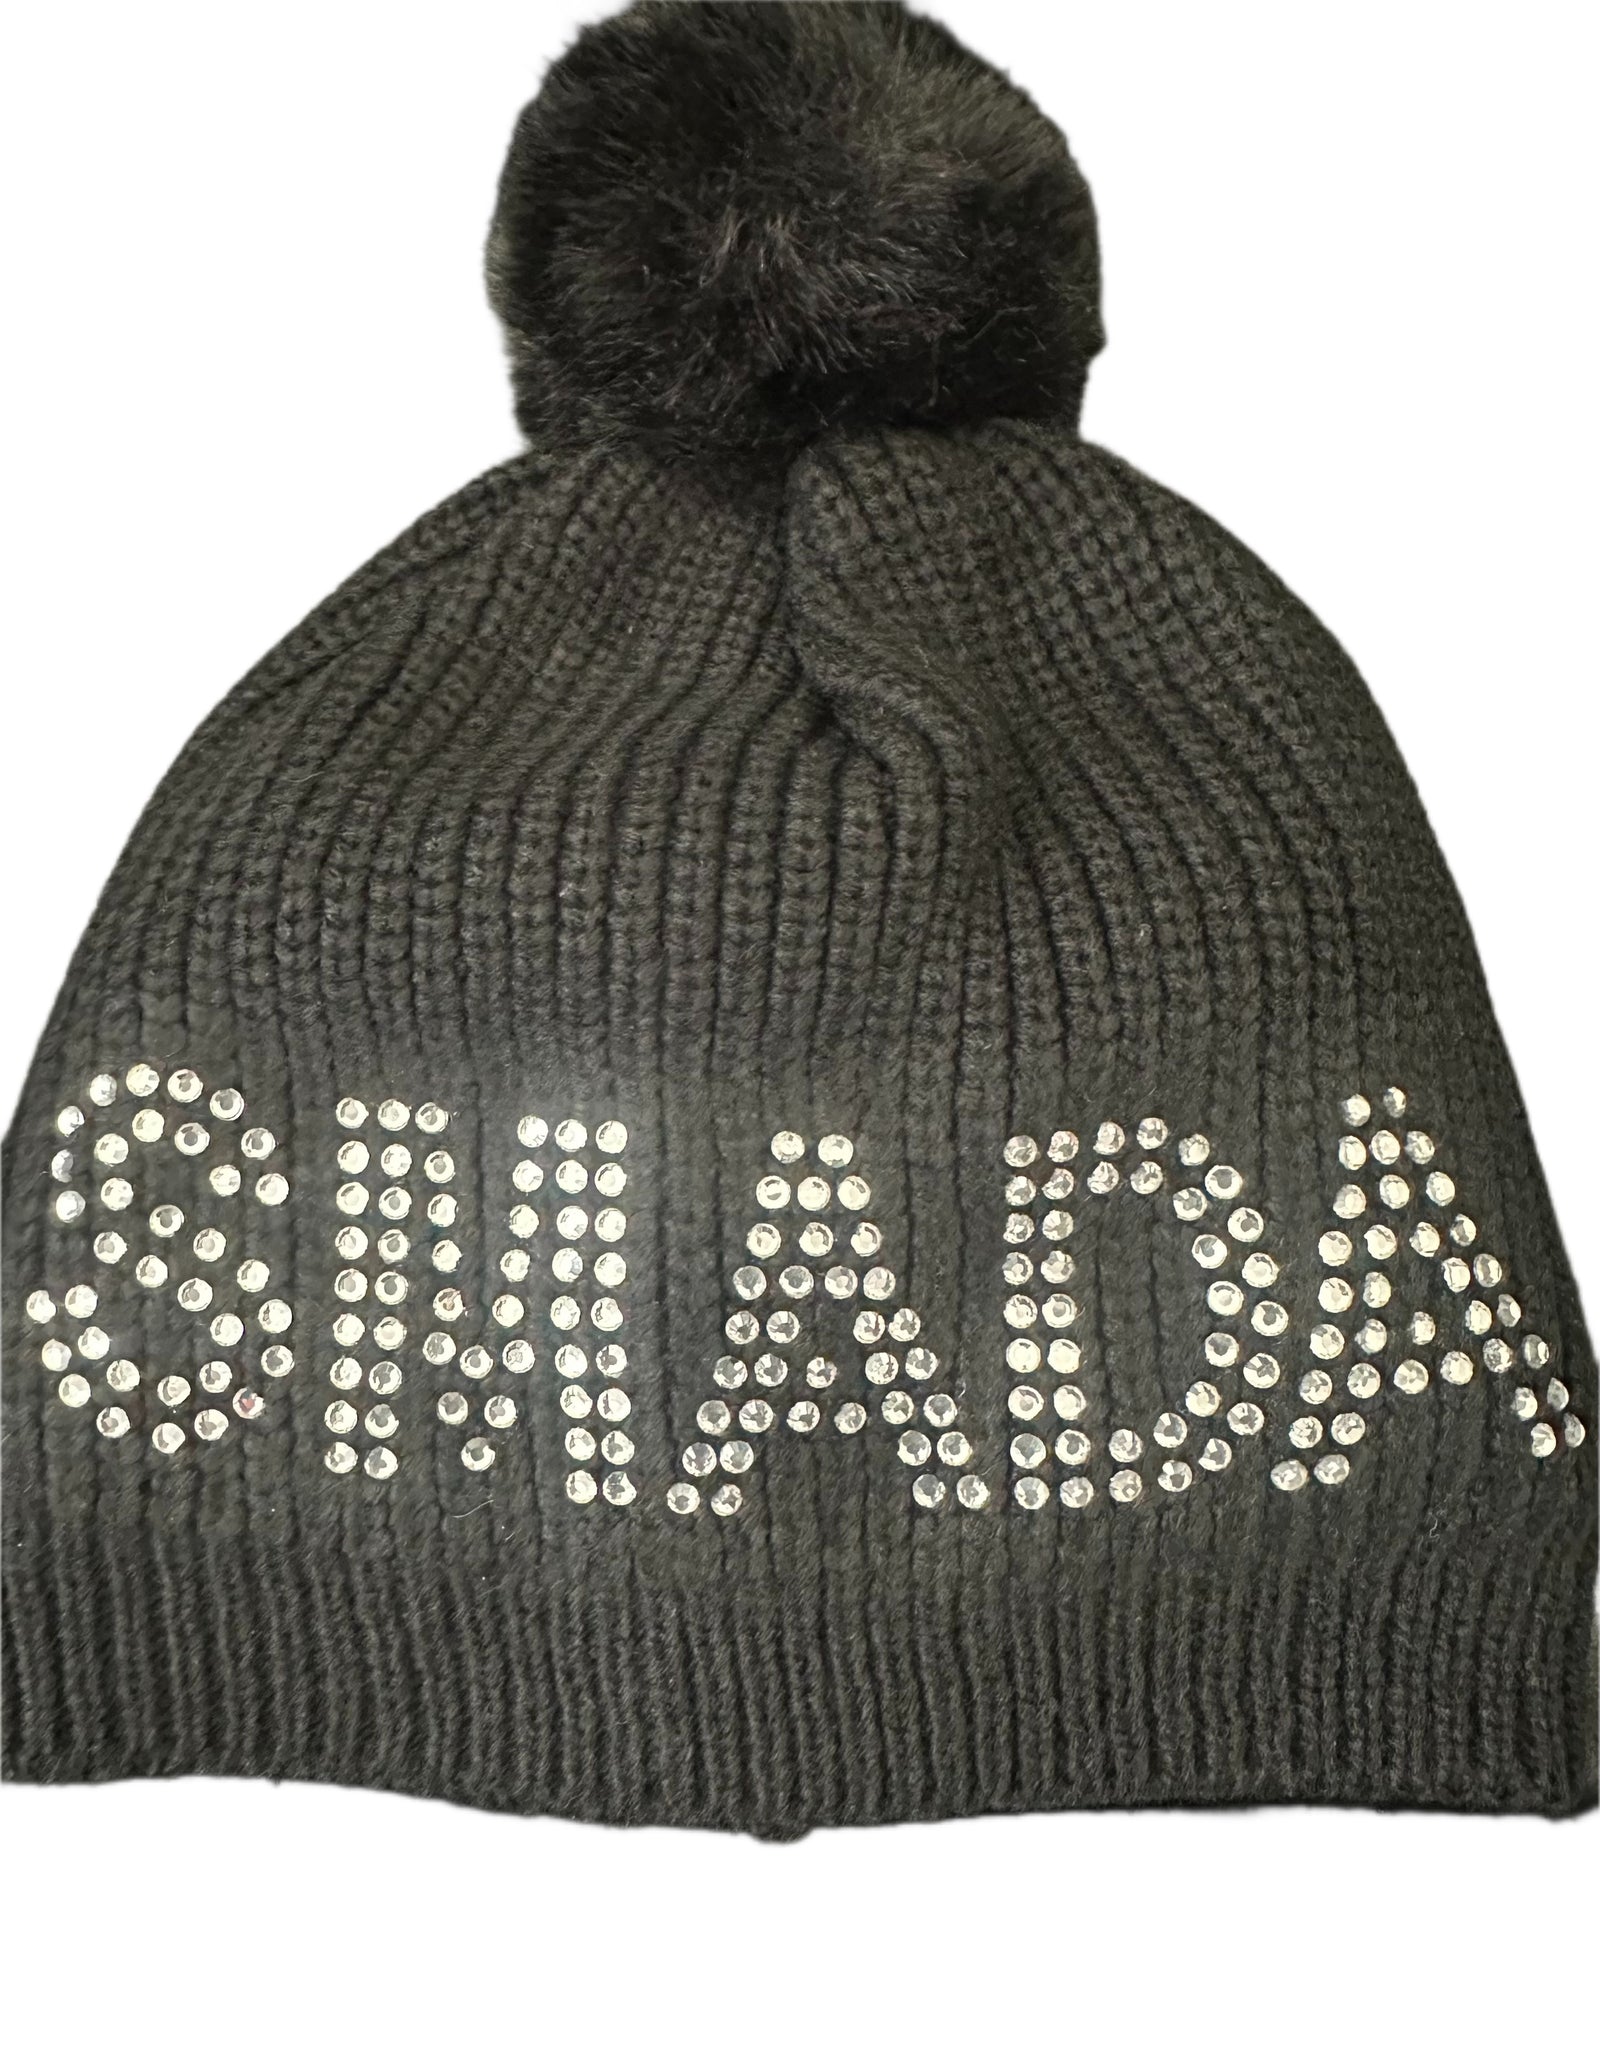 Bling Out SMADA Beanie